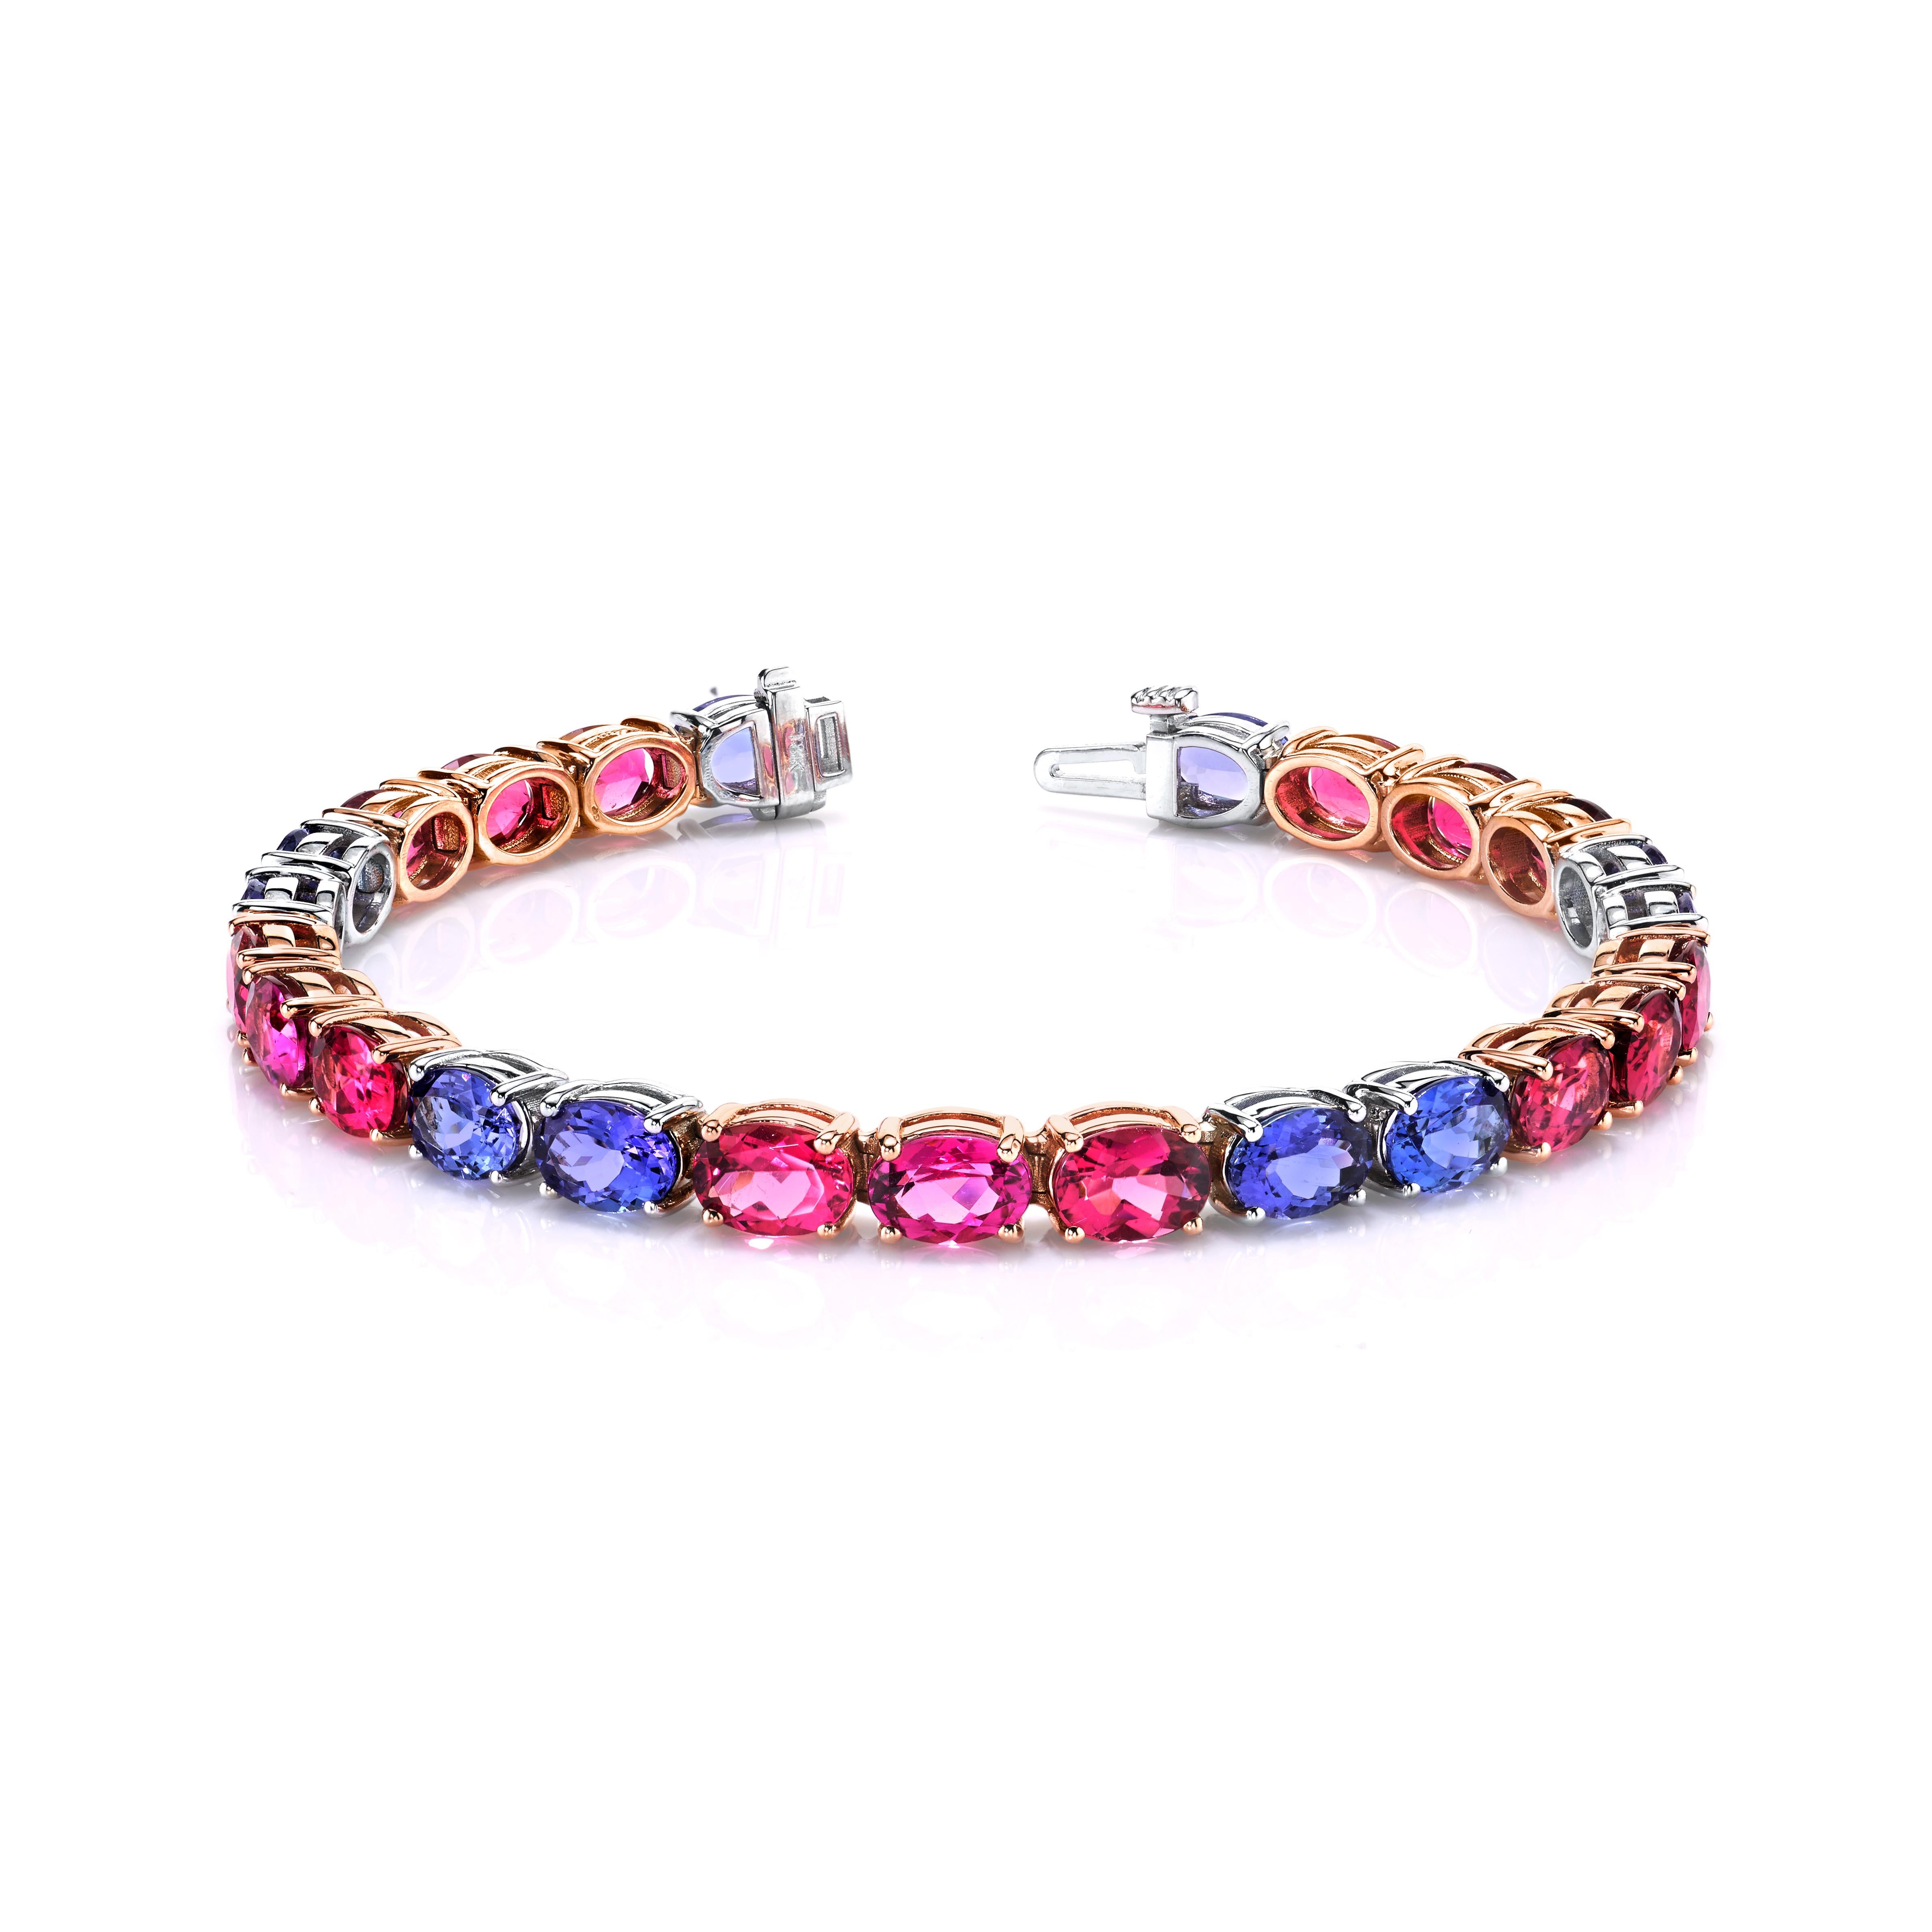 This one-of-a-kind bracelet features fine tanzanites and rich rubellite tourmalines set in 18k white and rose gold. While the line of stunning gems is laid out in classic tennis bracelet style, we have set the purple blue tanzanites and deep rosy